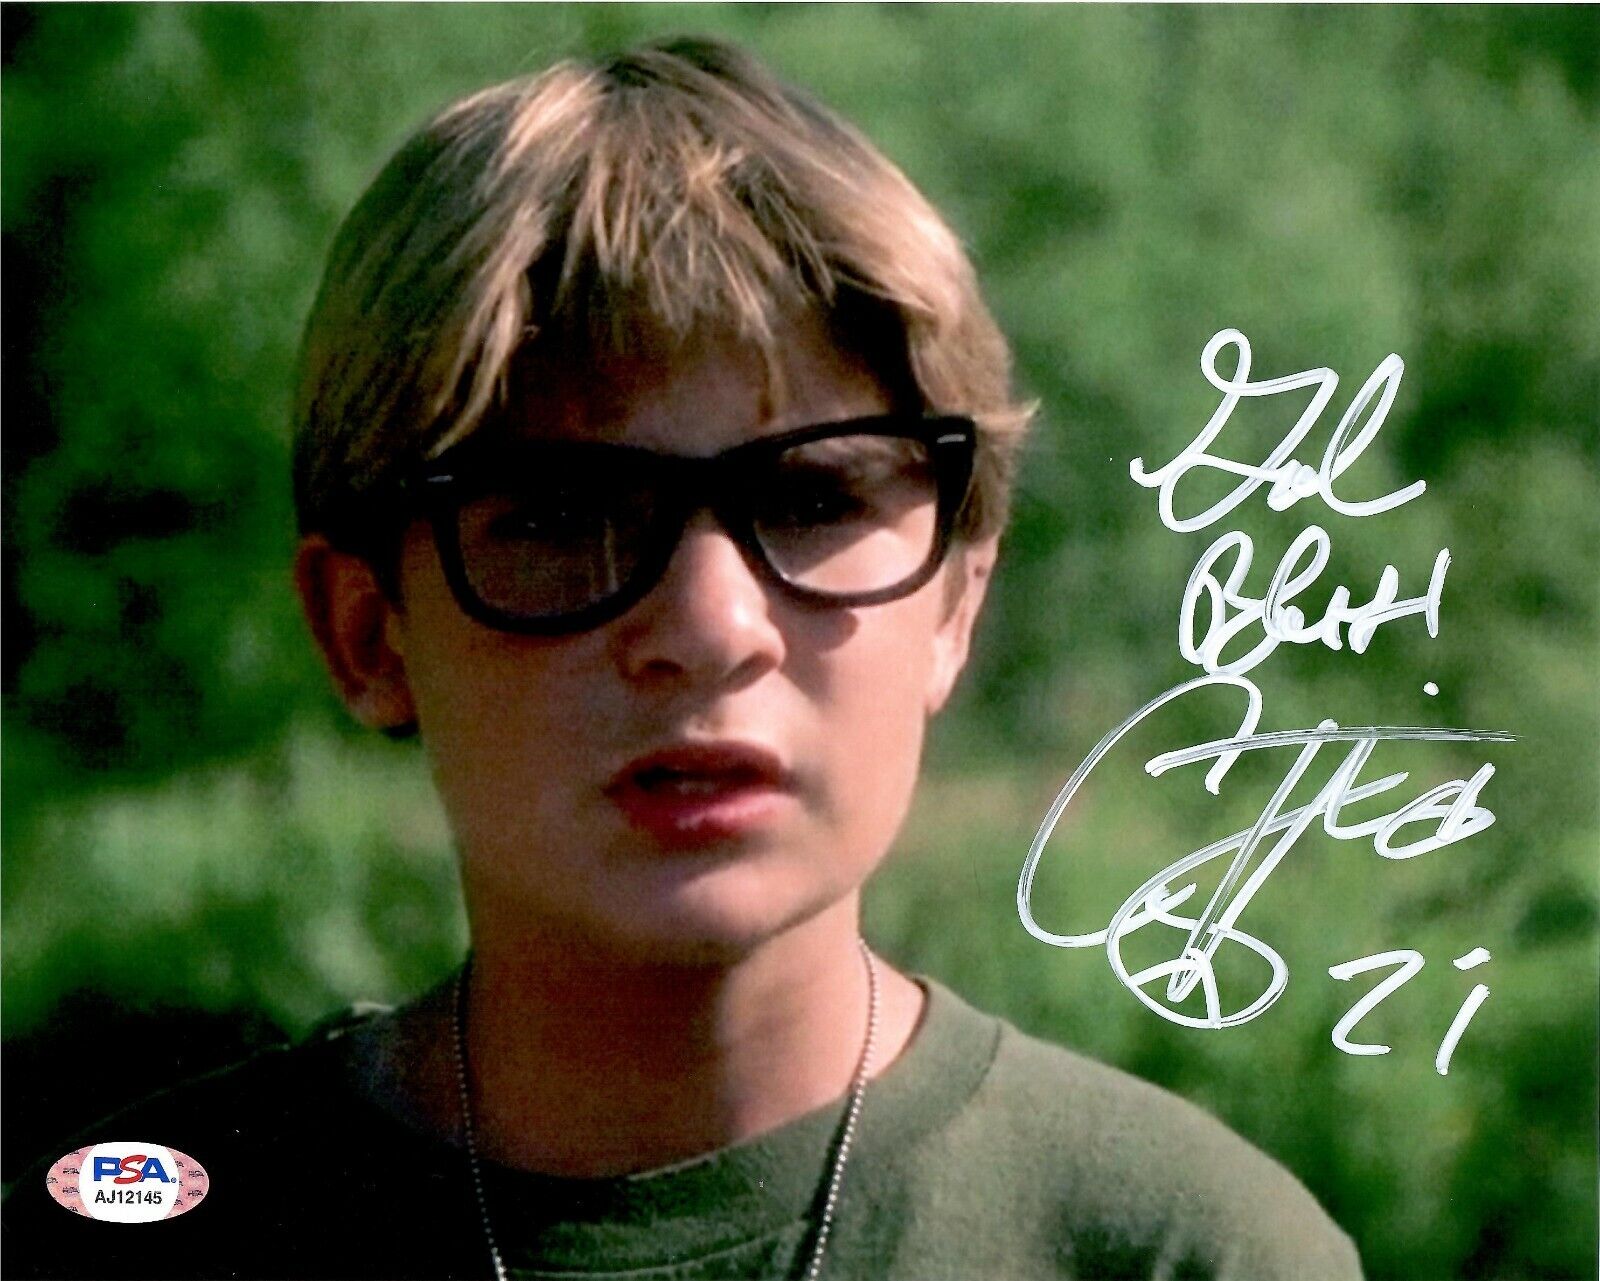 Corey Feldman autographed signed inscribed 8x10 Photo Poster painting PSA COA Stand By Me Teddy